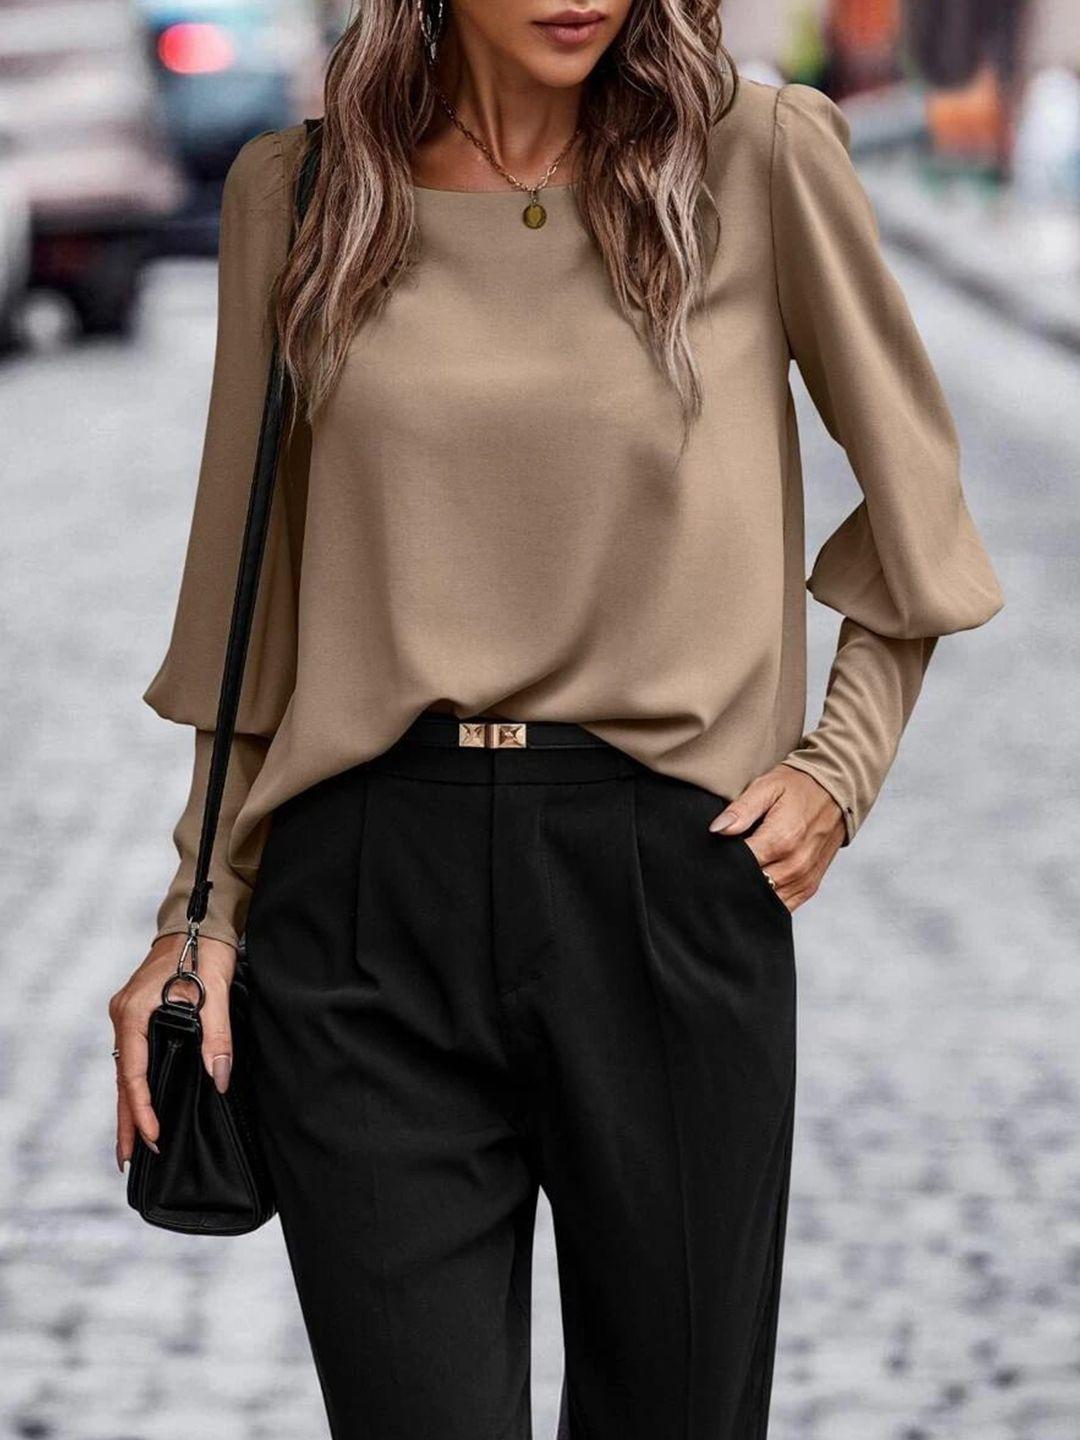 stylecast brown boat neck cuffed sleeves top